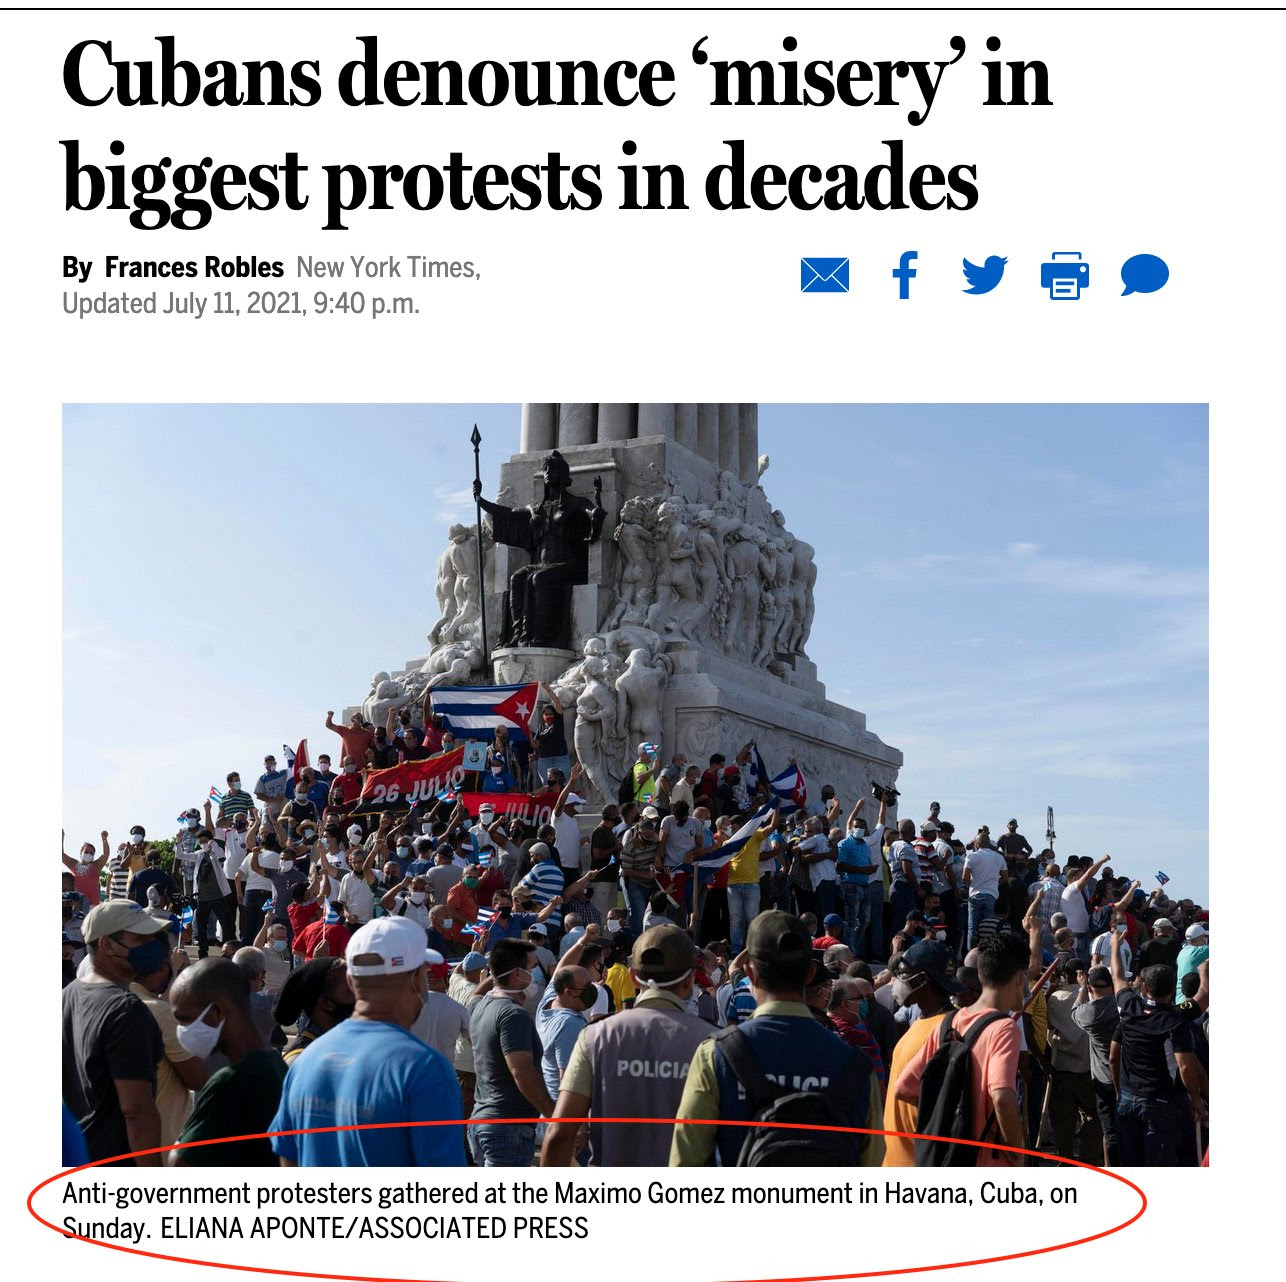 Boston Globe: Cubans Denounce 'Misery' in Biggest Protests in Decades